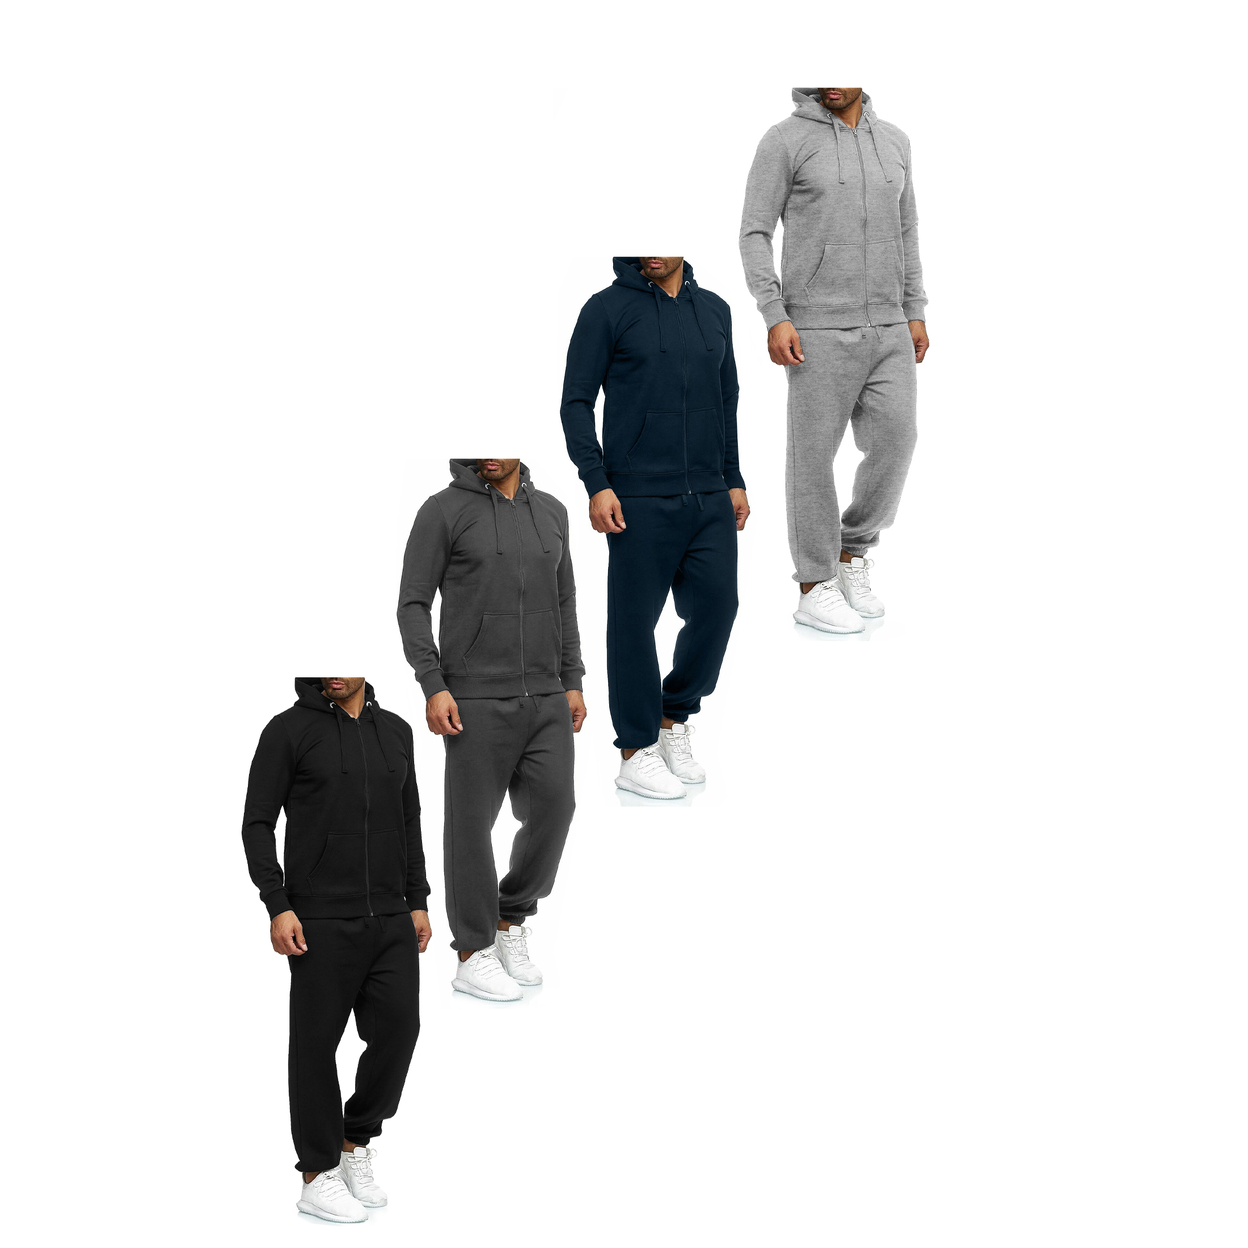 Men's Casual Big & Tall Athletic Active Winter Warm Fleece Lined Full Zip Tracksuit Jogger Set - Grey, Small